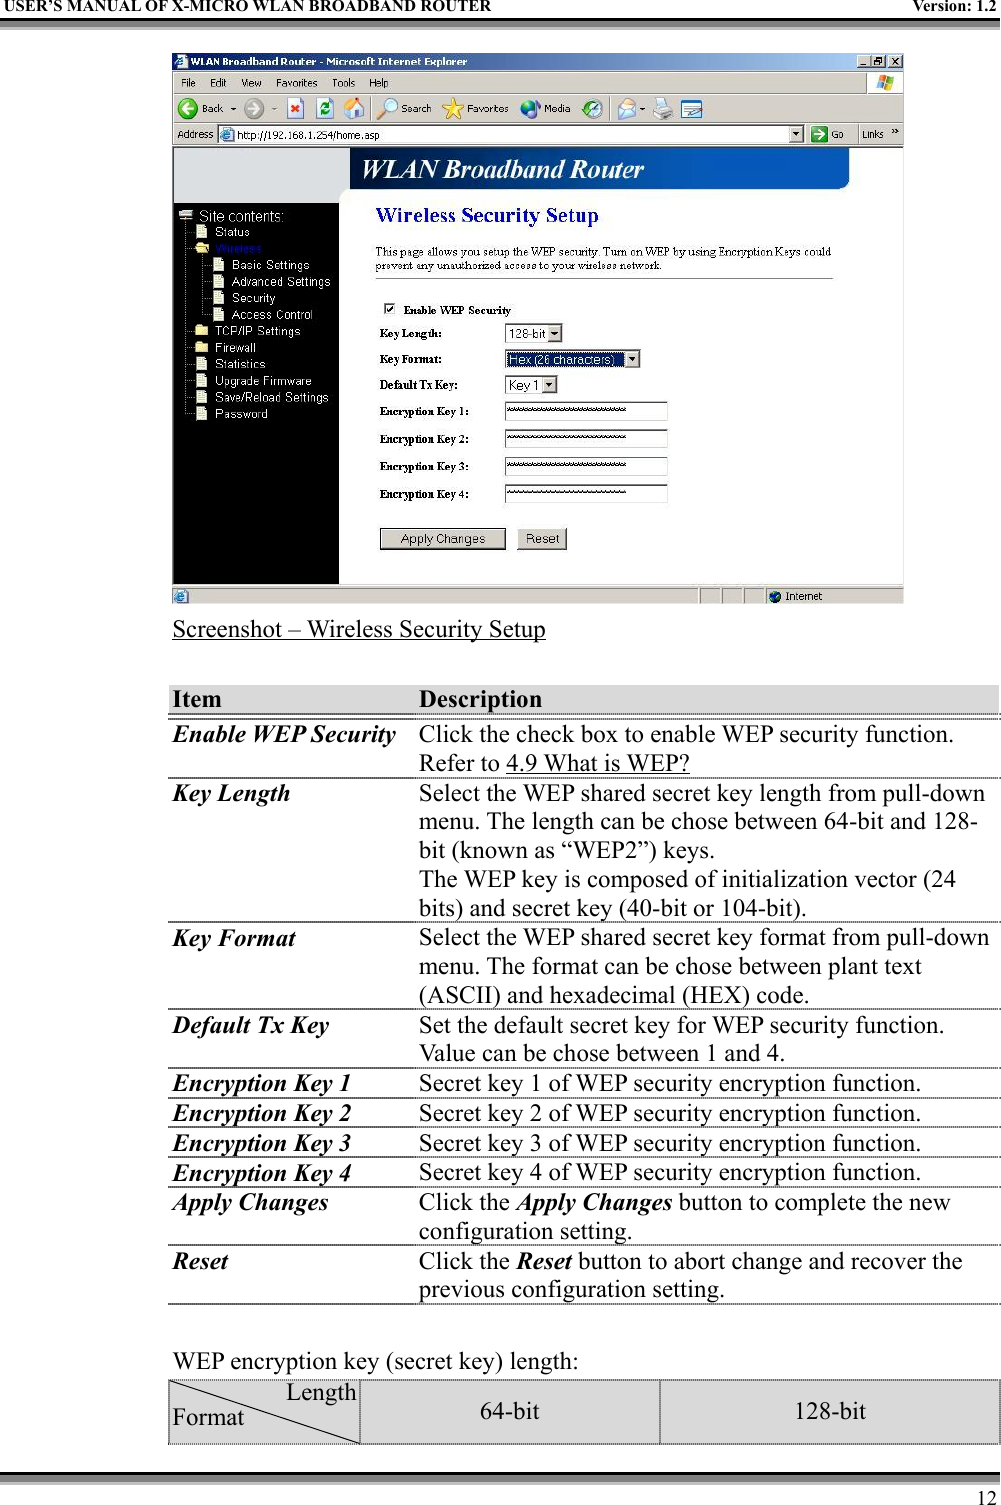 USER’S MANUAL OF X-MICRO WLAN BROADBAND ROUTER Version: 1.212Screenshot – Wireless Security SetupItem DescriptionEnable WEP Security Click the check box to enable WEP security function.Refer to 4.9 What is WEP?Key Length Select the WEP shared secret key length from pull-downmenu. The length can be chose between 64-bit and 128-bit (known as “WEP2”) keys.The WEP key is composed of initialization vector (24bits) and secret key (40-bit or 104-bit).Key Format Select the WEP shared secret key format from pull-downmenu. The format can be chose between plant text(ASCII) and hexadecimal (HEX) code.Default Tx Key Set the default secret key for WEP security function.Value can be chose between 1 and 4.Encryption Key 1 Secret key 1 of WEP security encryption function.Encryption Key 2 Secret key 2 of WEP security encryption function.Encryption Key 3 Secret key 3 of WEP security encryption function.Encryption Key 4 Secret key 4 of WEP security encryption function.Apply Changes Click the Apply Changes button to complete the newconfiguration setting.Reset Click the Reset button to abort change and recover theprevious configuration setting.WEP encryption key (secret key) length:LengthFormat 64-bit 128-bit